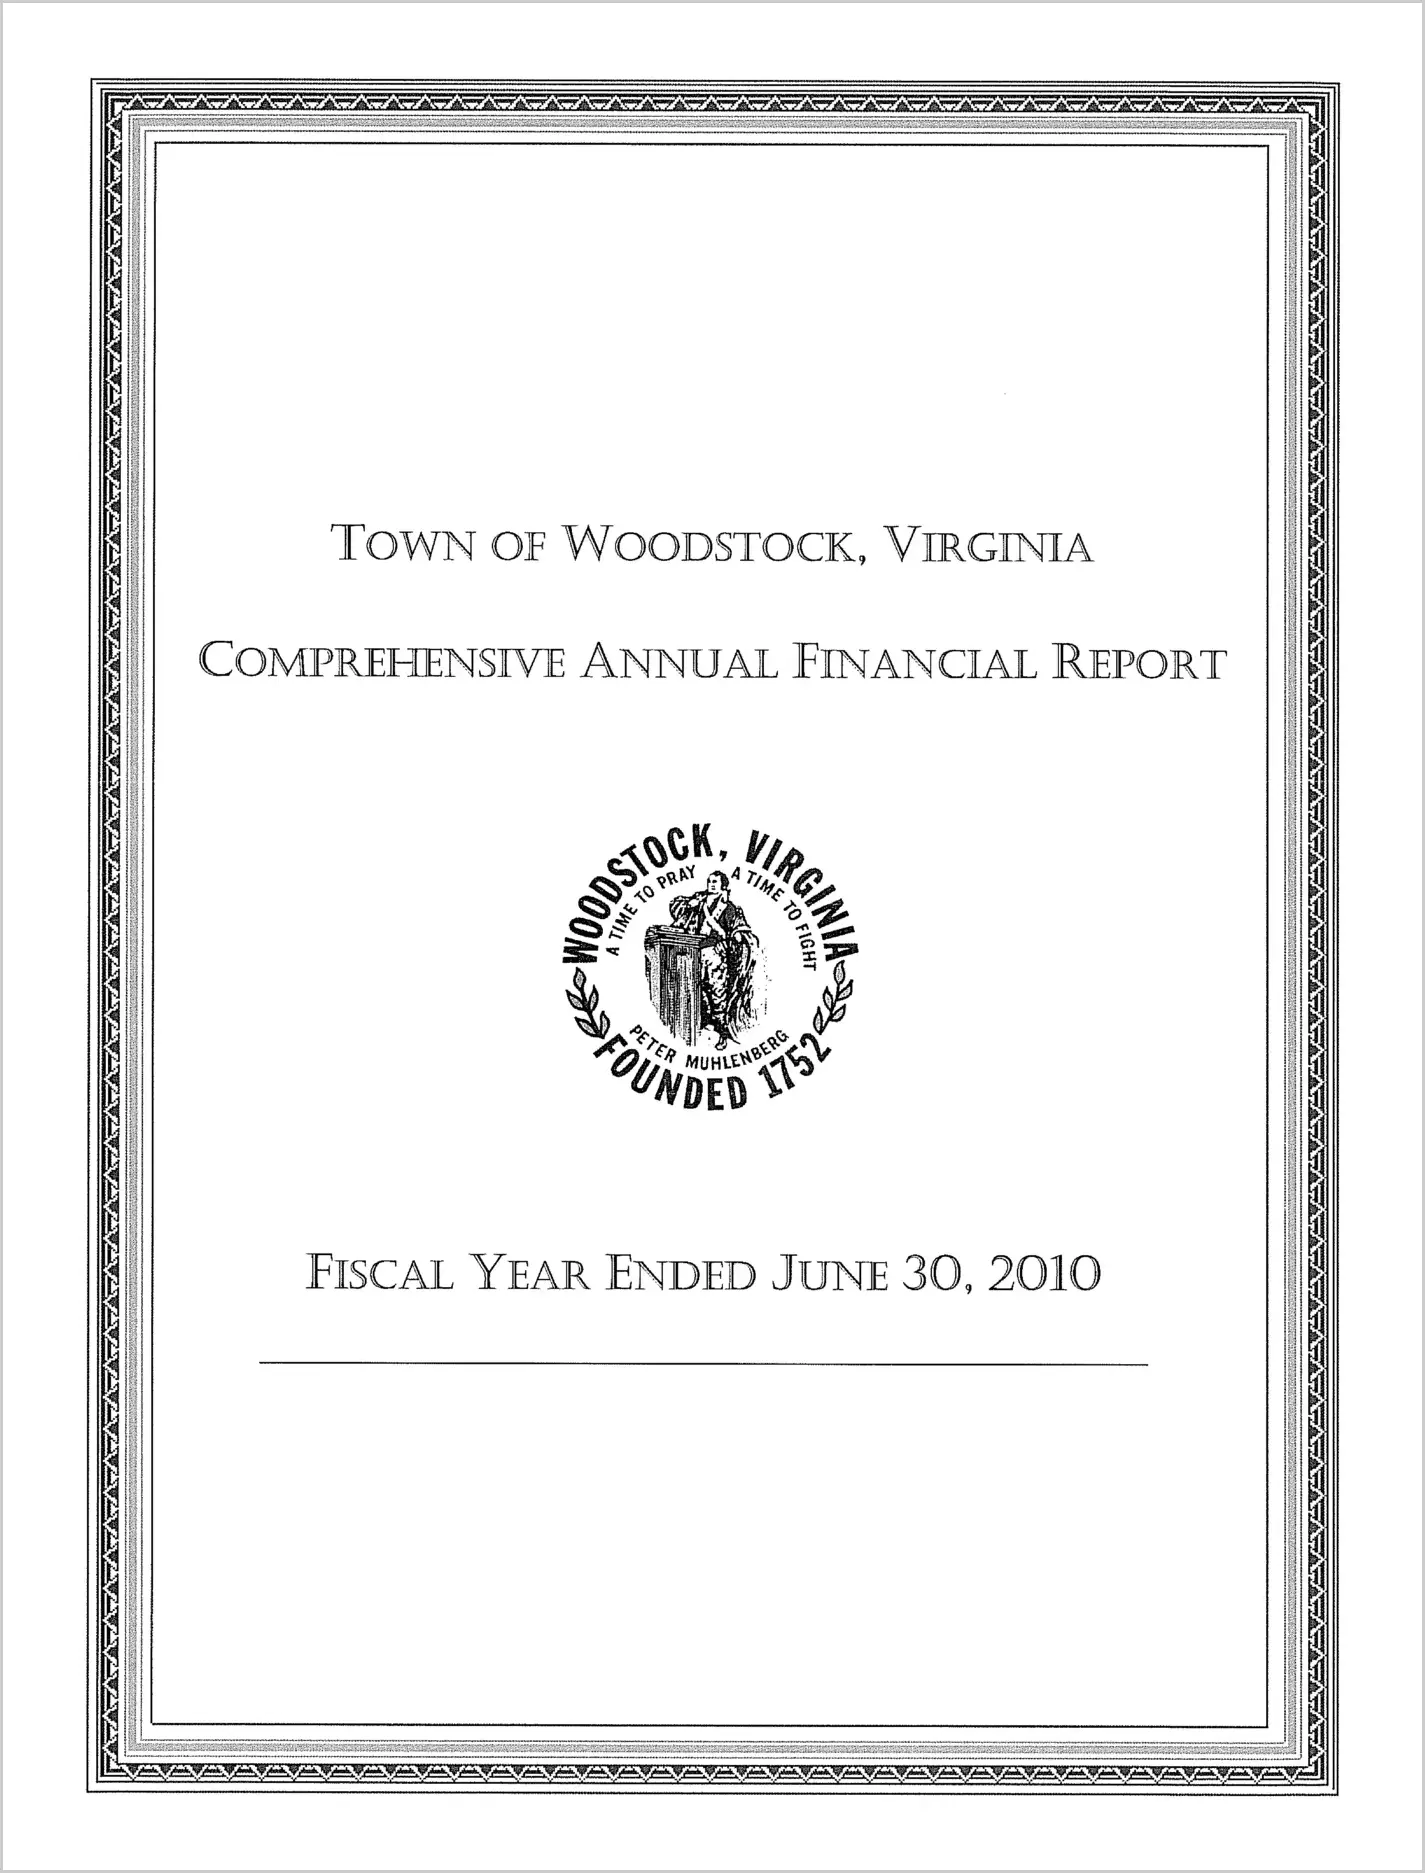 2010 Annual Financial Report for Town of Woodstock